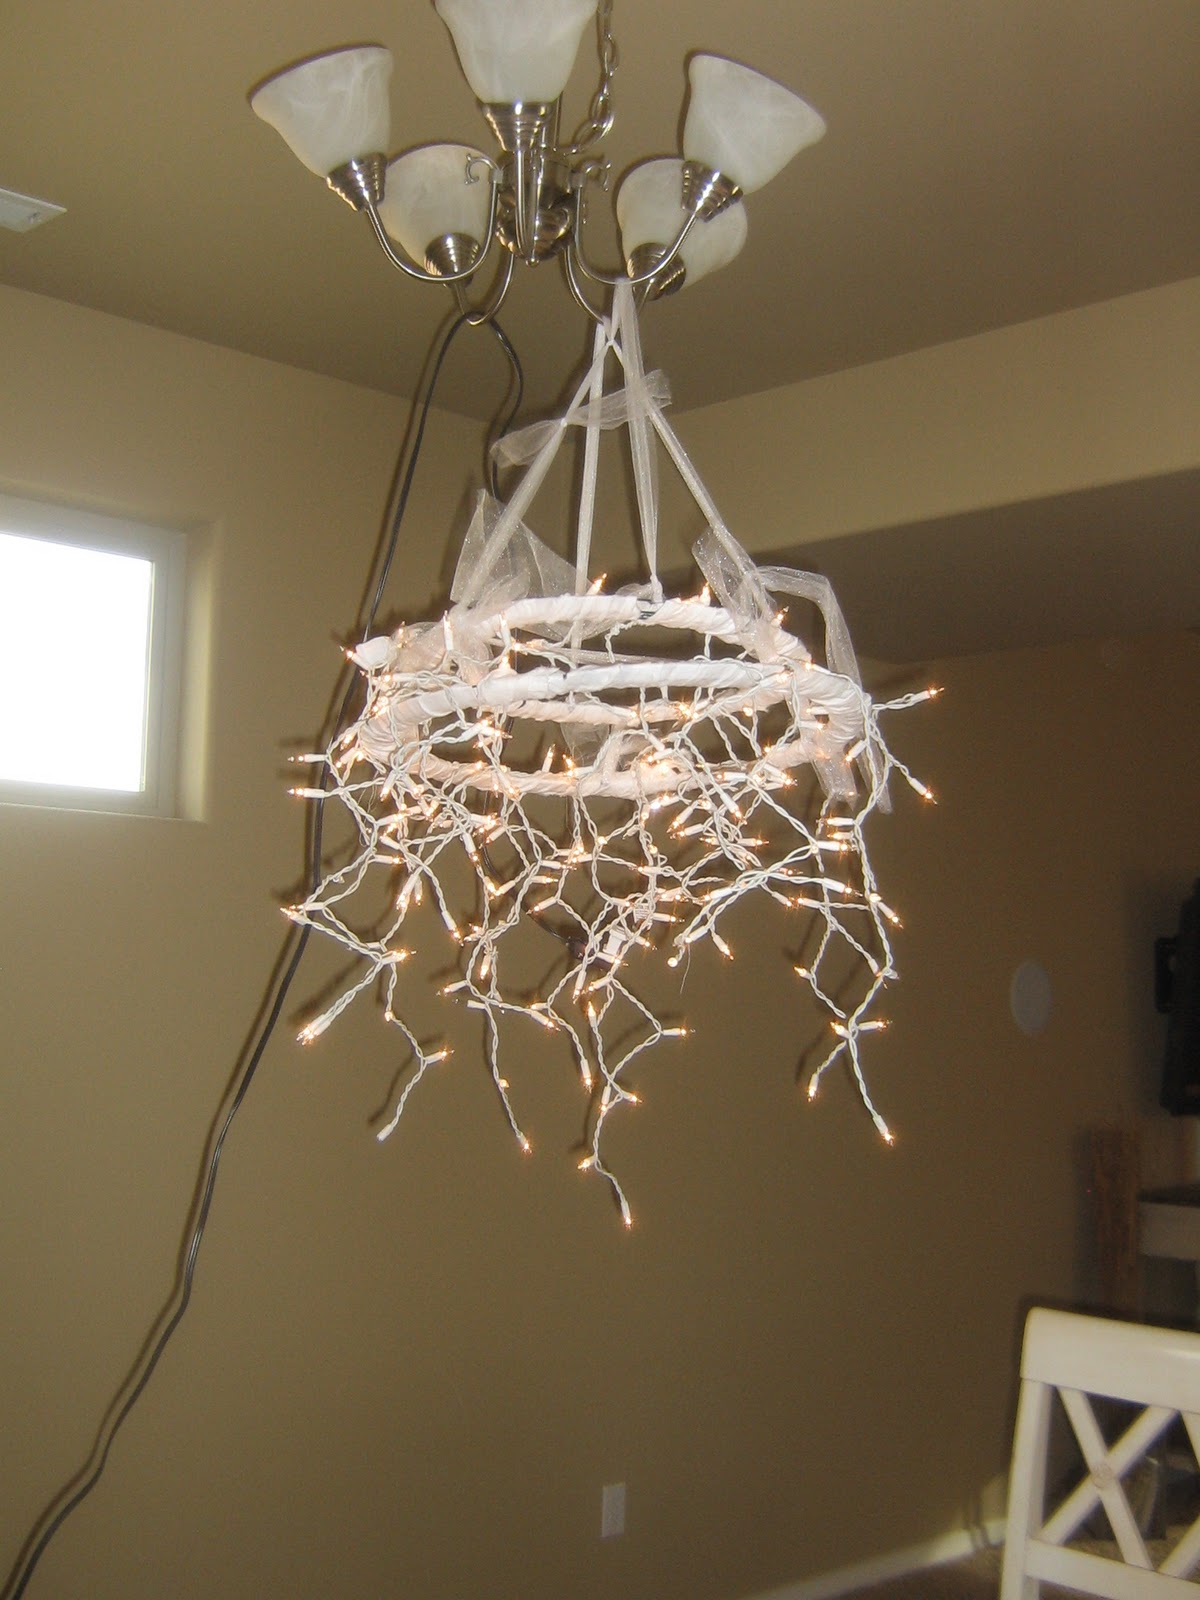 Home is where they love you: Christmas Light Chandelier